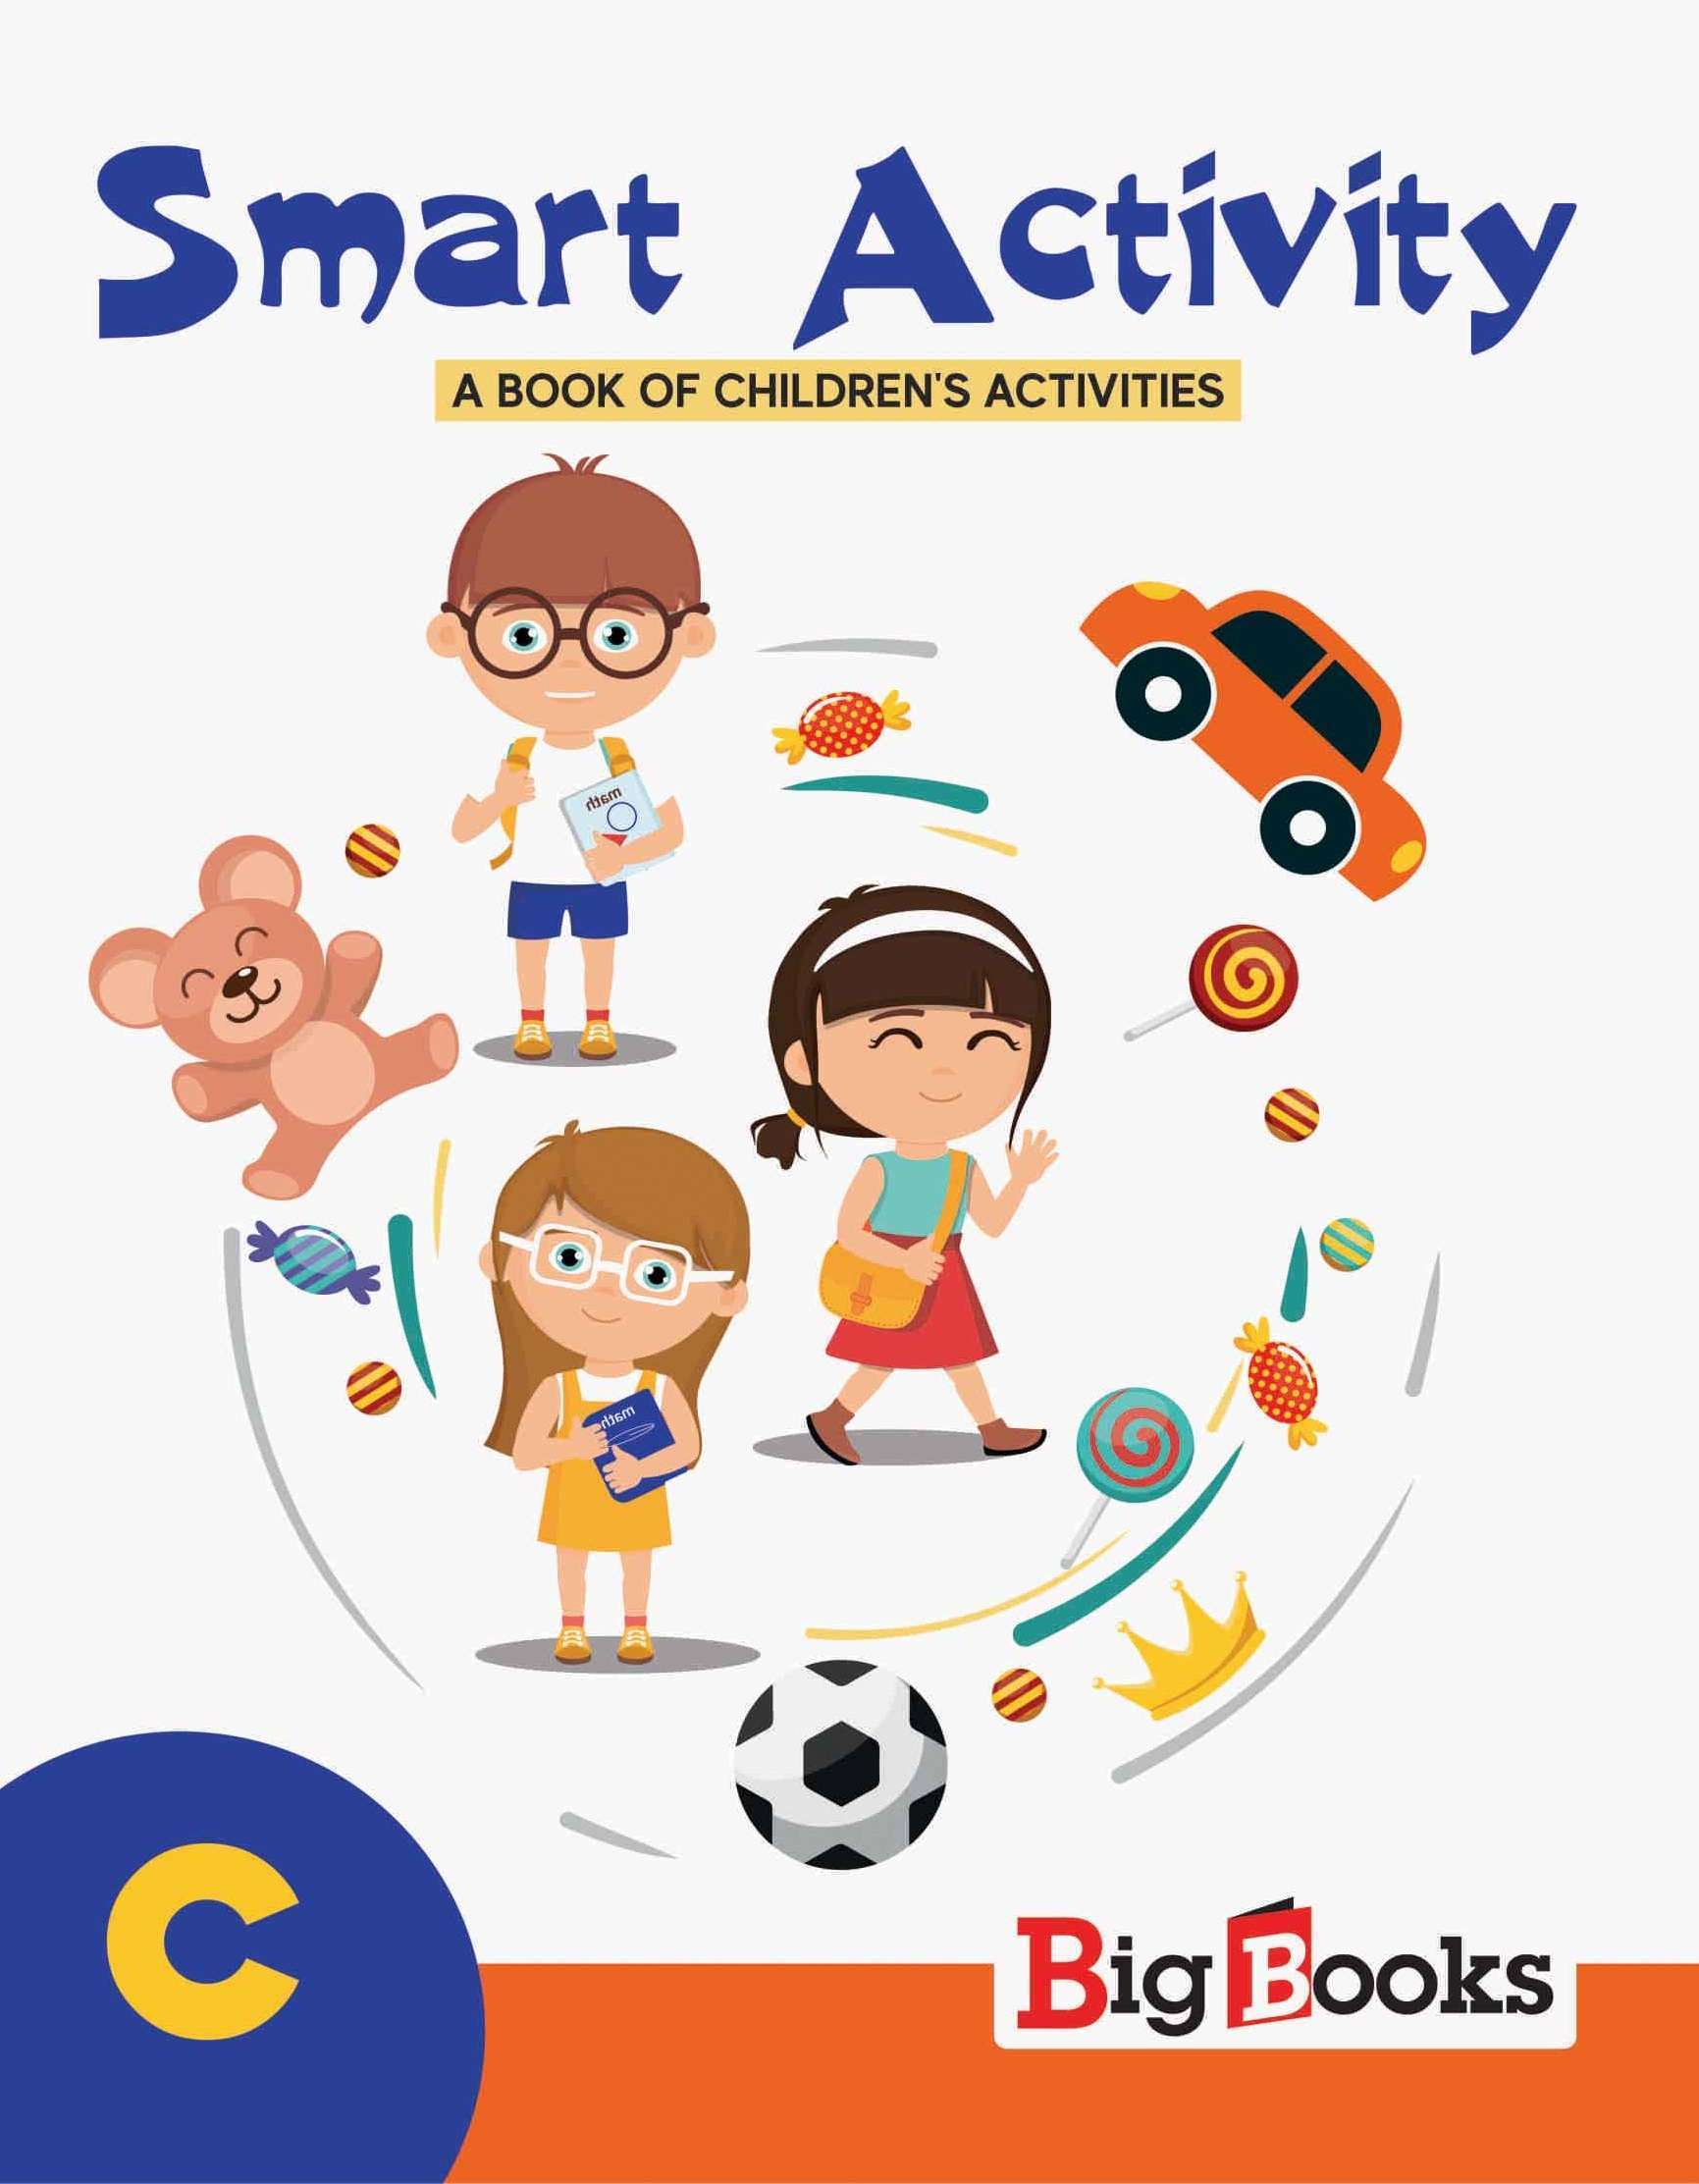 Buy smart activity book for 3